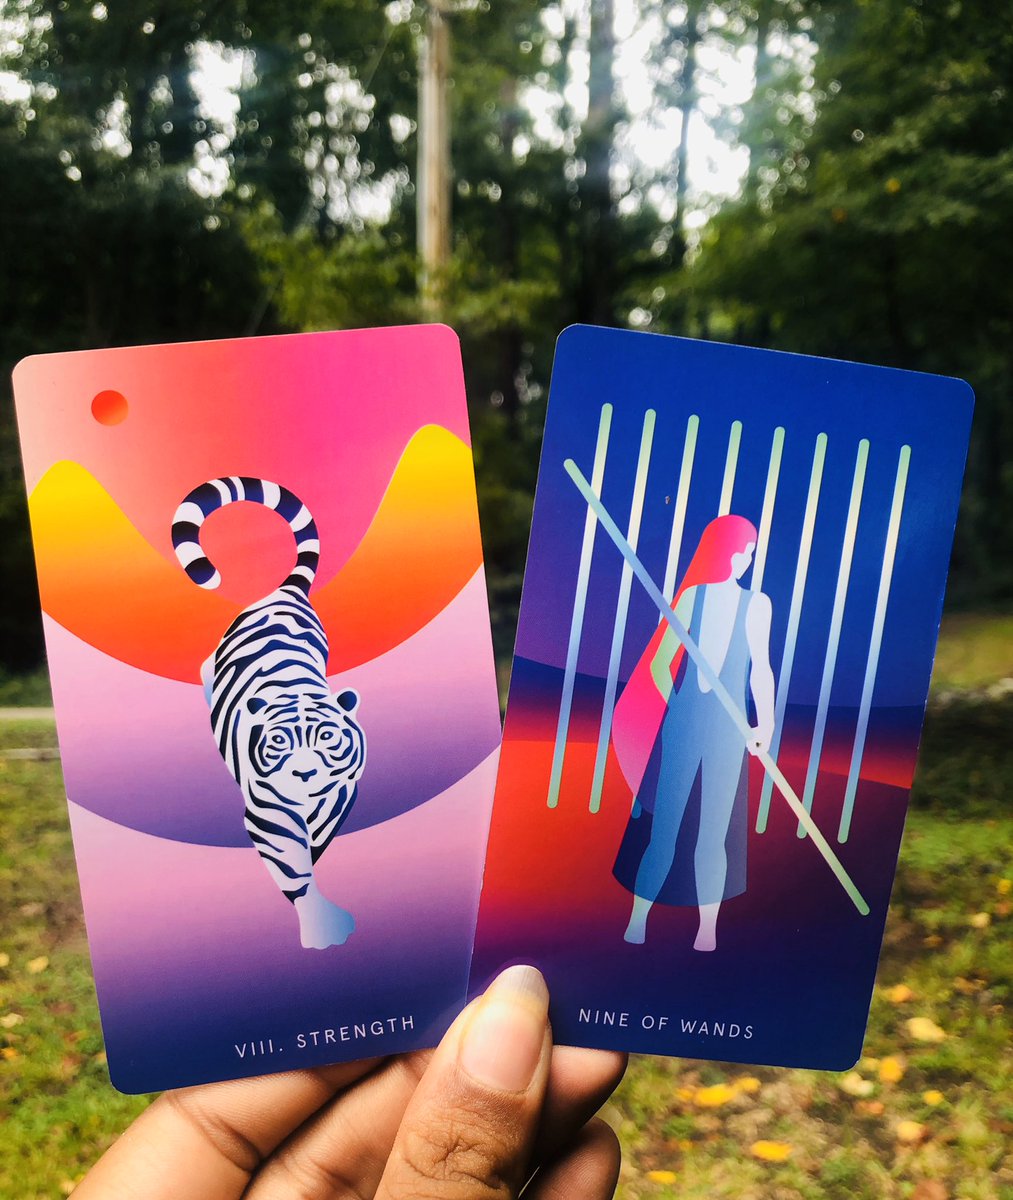 Aries, Leo and Sagittarius Placements You are inherently abundant. You will receive compensation for all of your loses. A new beginning will accompany redemption. One of your champion ancestors is standing guard and committed to seeing you live into your wholeness.